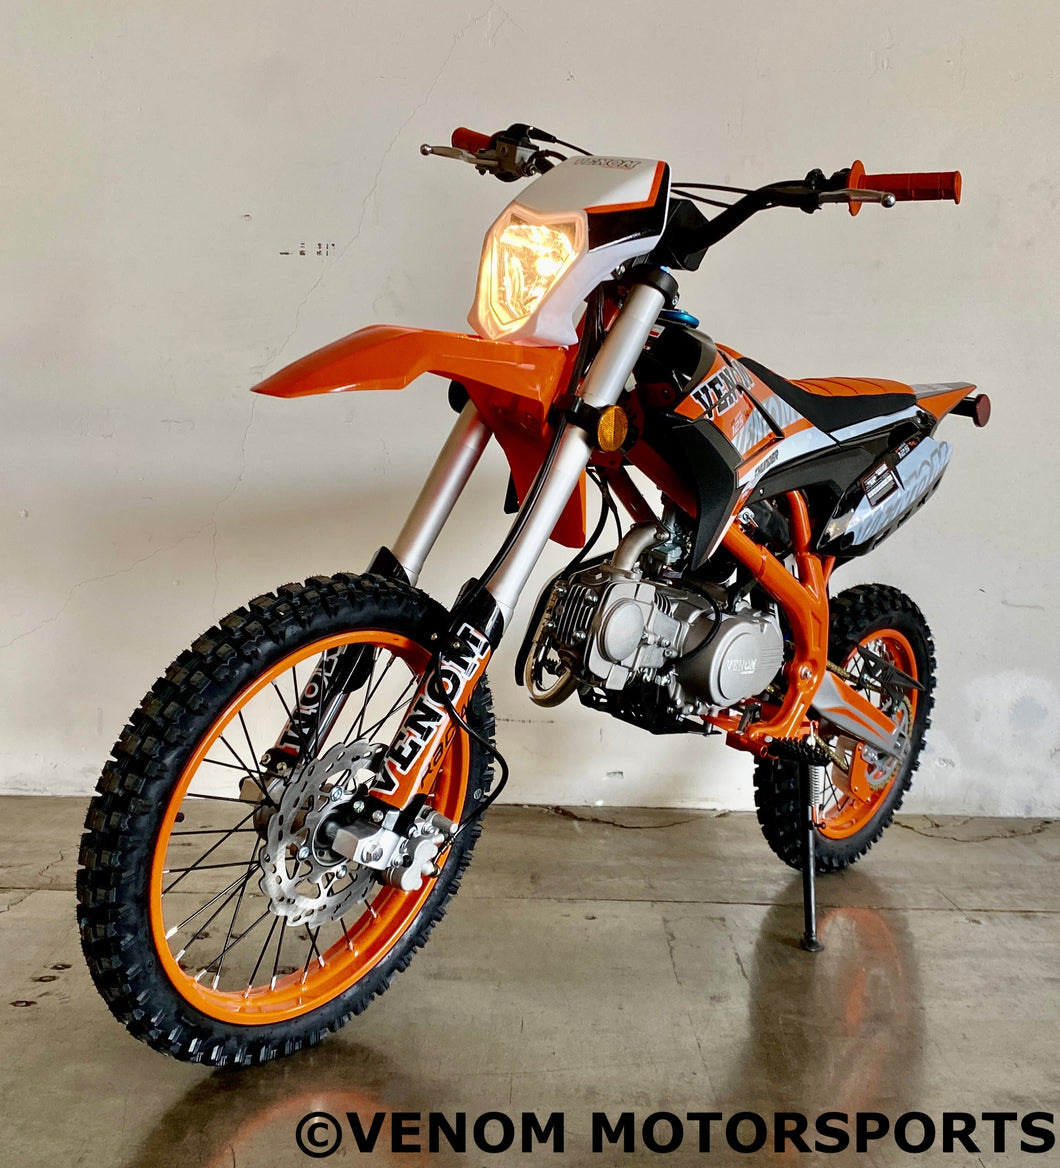 Thunder 125cc dirt bike for sale. VX125 for sale online free shipping. 